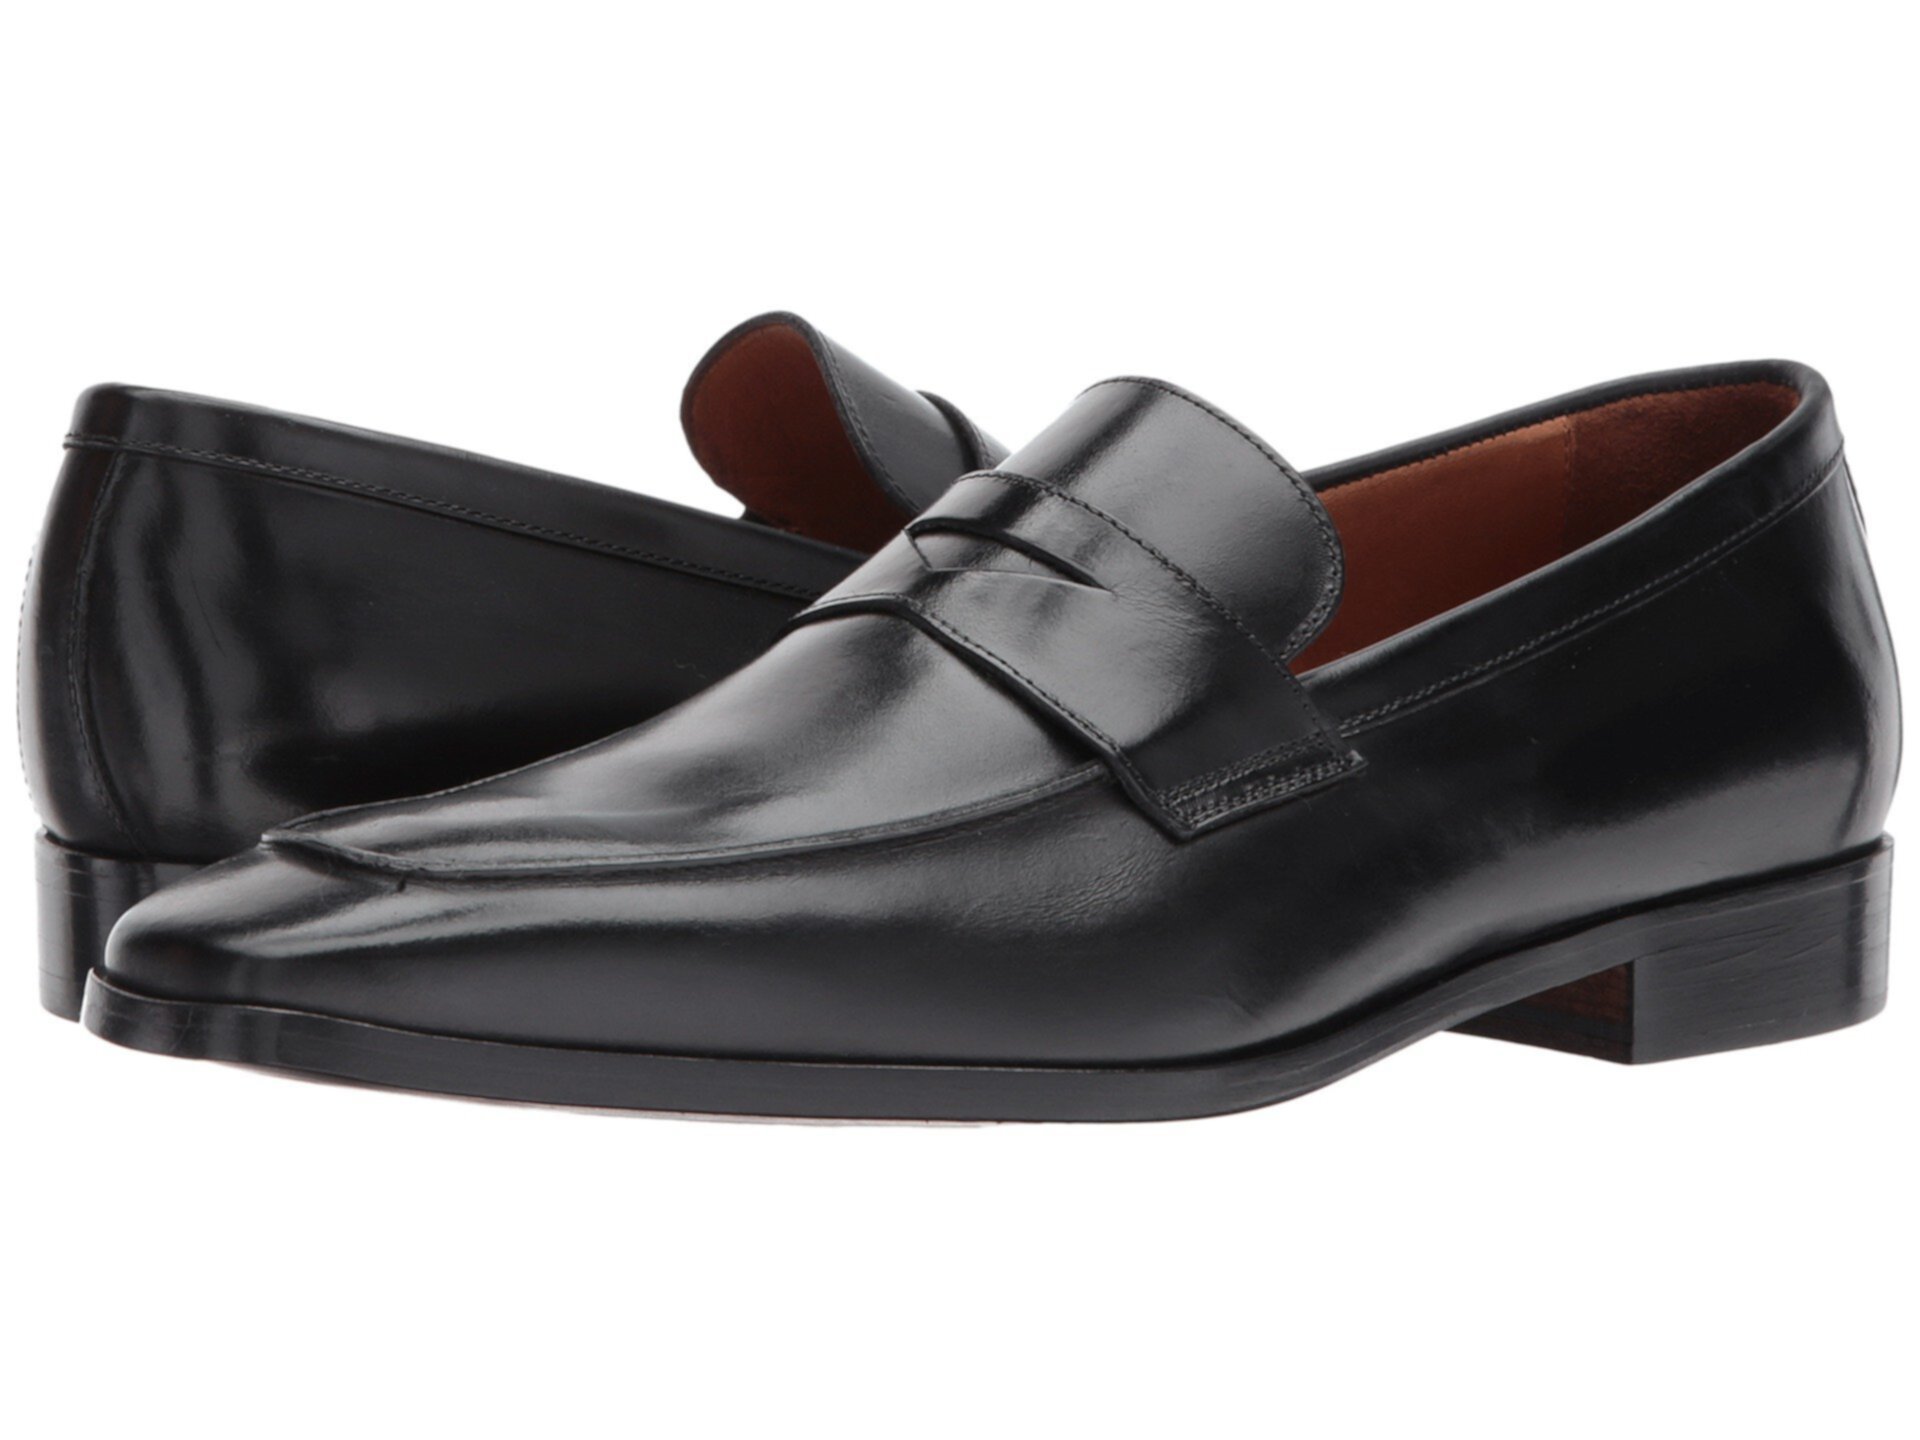 Drop Penny Loafer Massimo Matteo